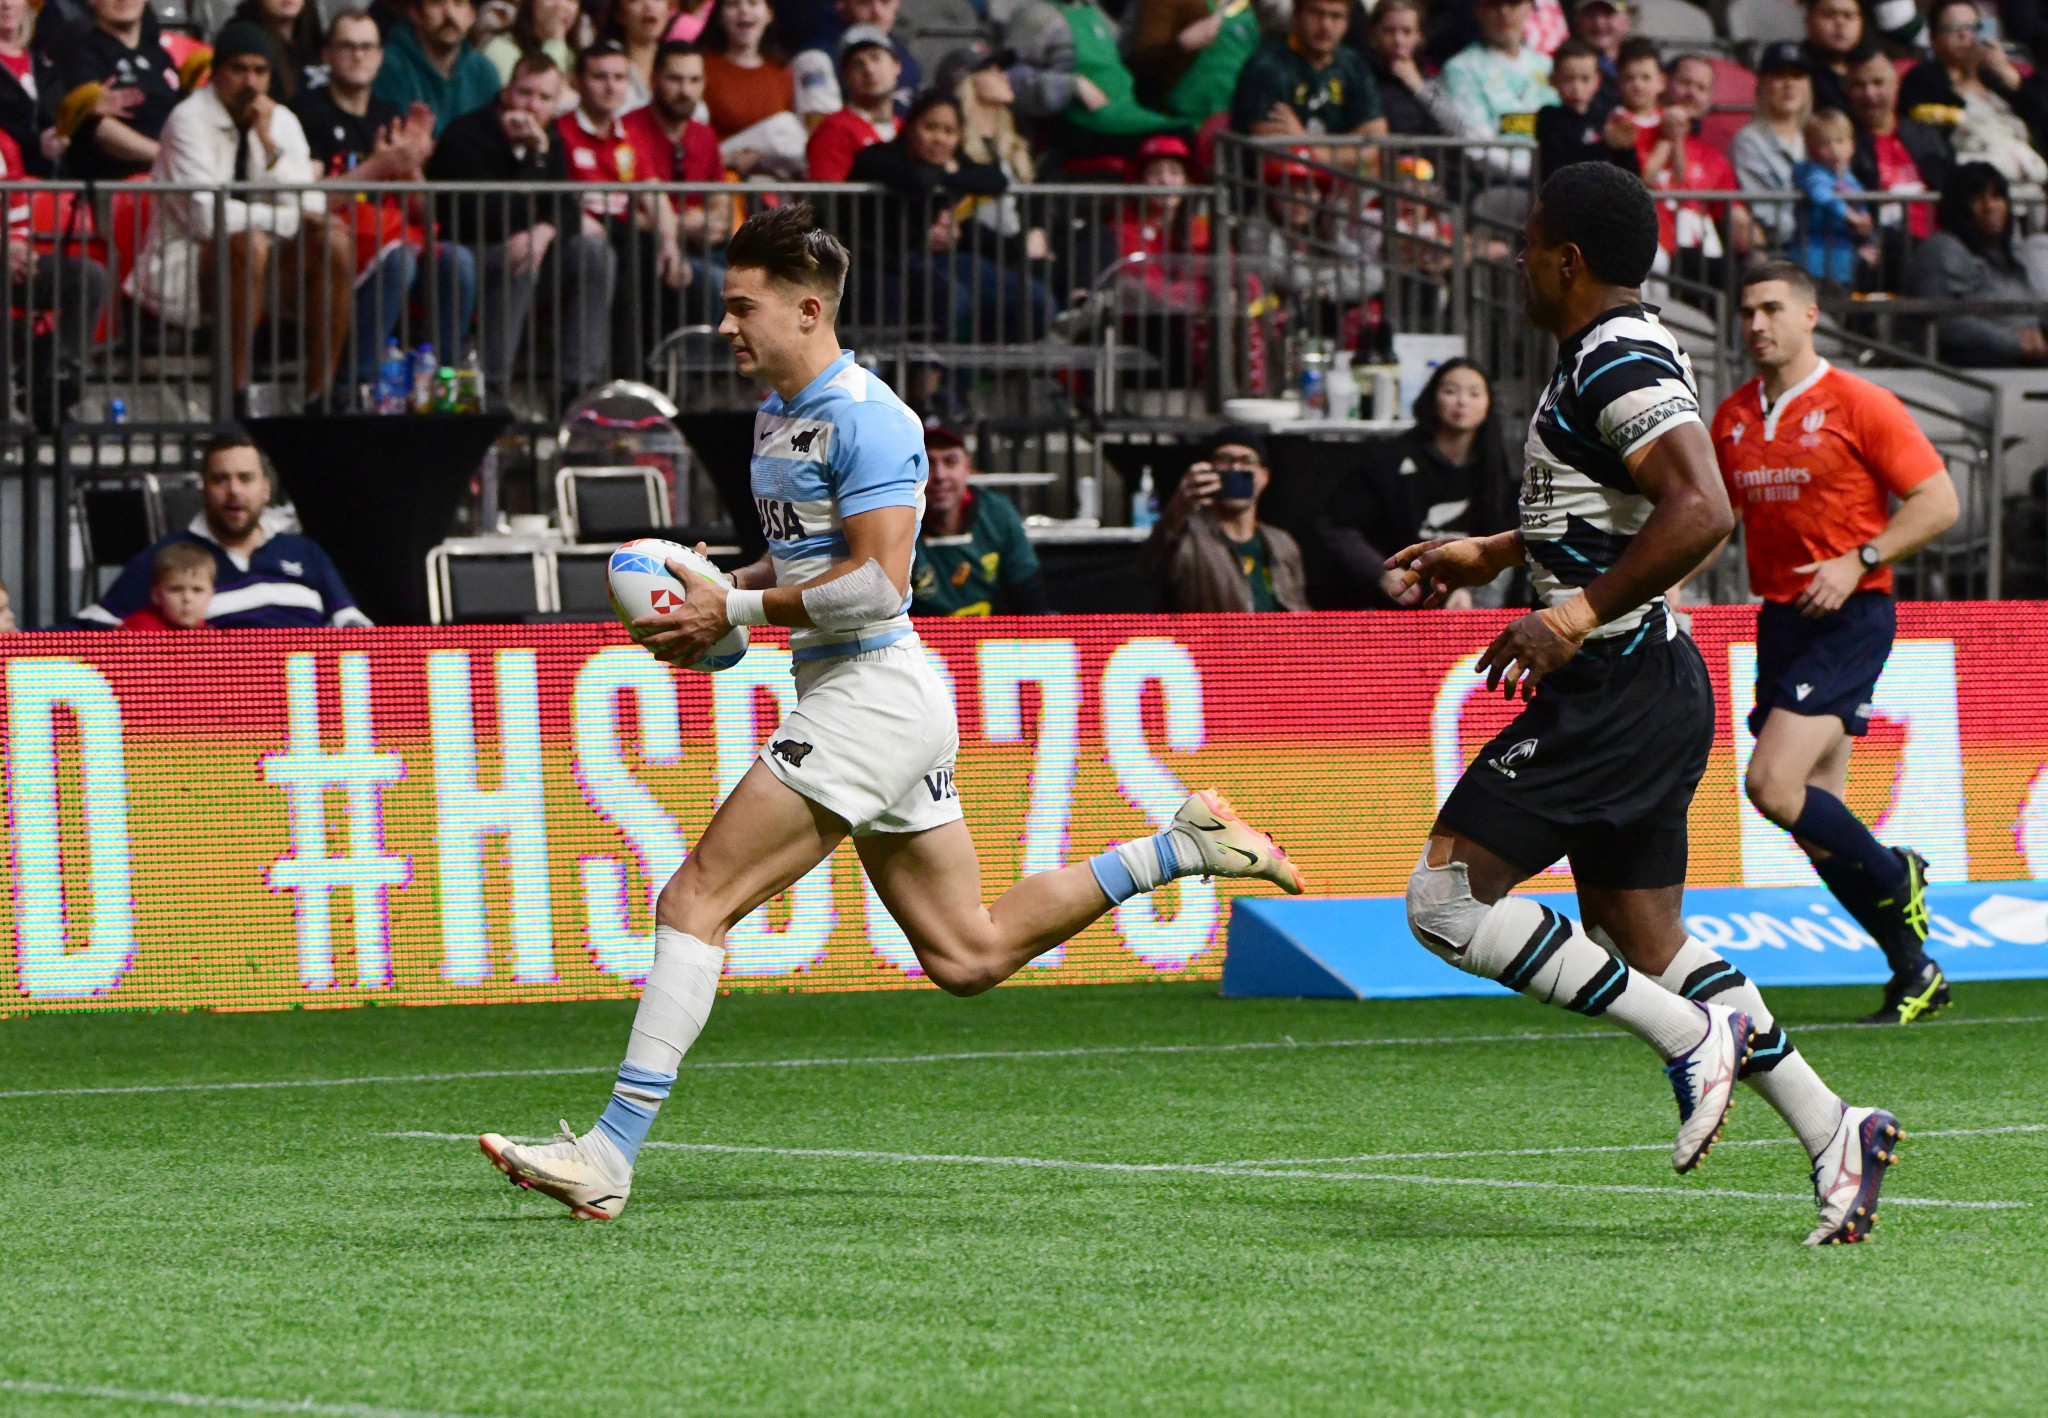 Marcos Moneta, left, scored 10 tries for Argentina at the World Rugby Sevens Series event in Vancouver ©Getty Images